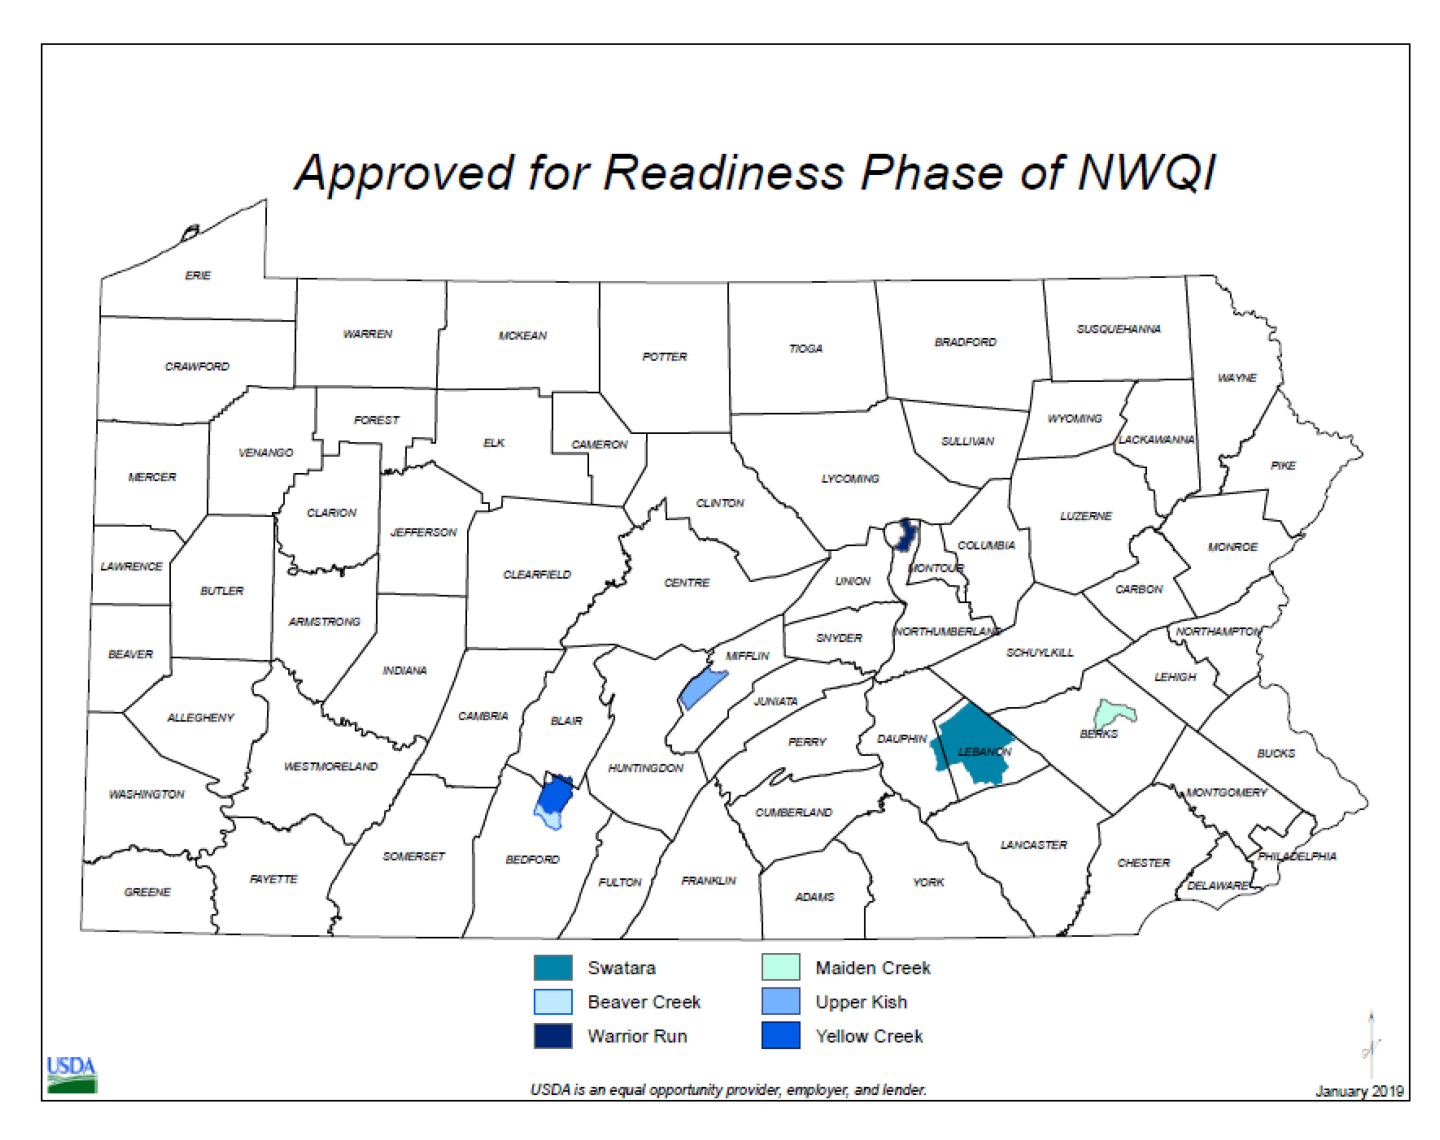 Map of watersheds approved for Readiness Phase of NWQI